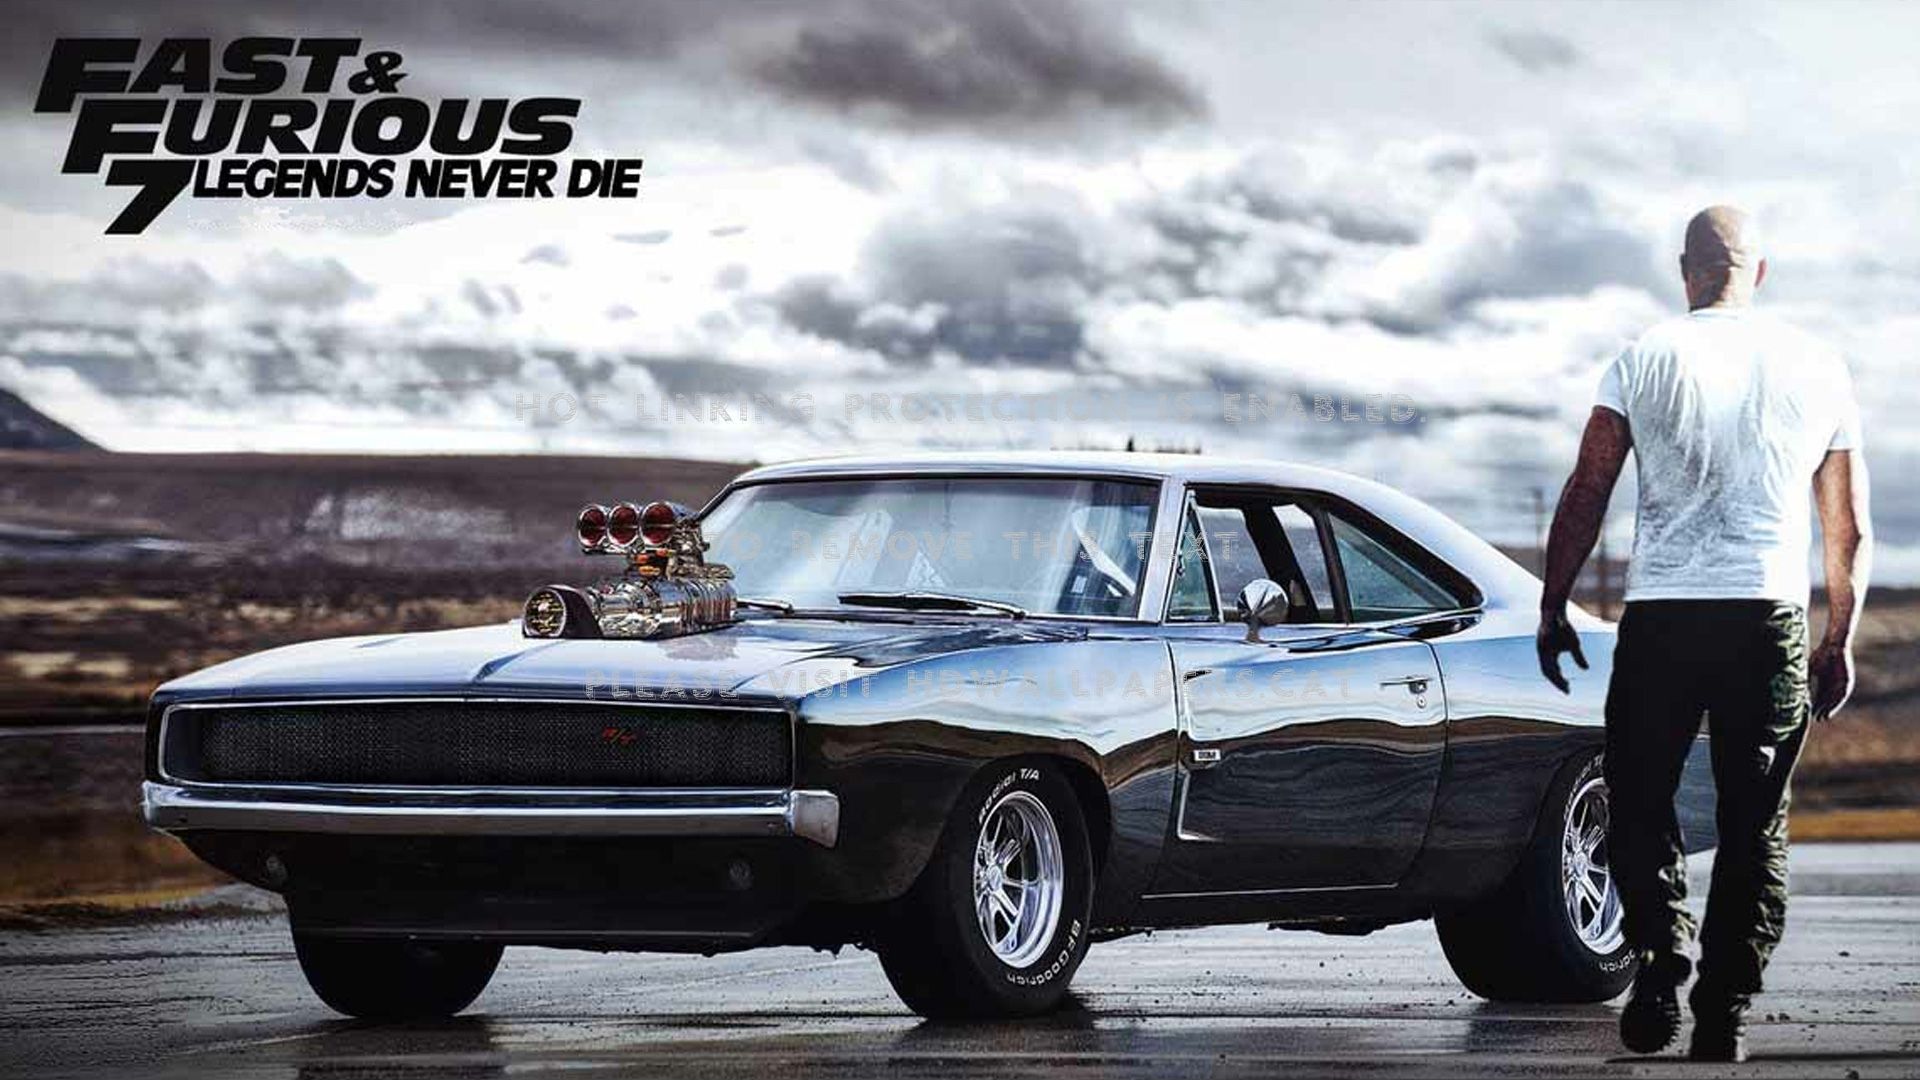 Fast and Furious Charger Wallpaper Free Fast and Furious Charger Background